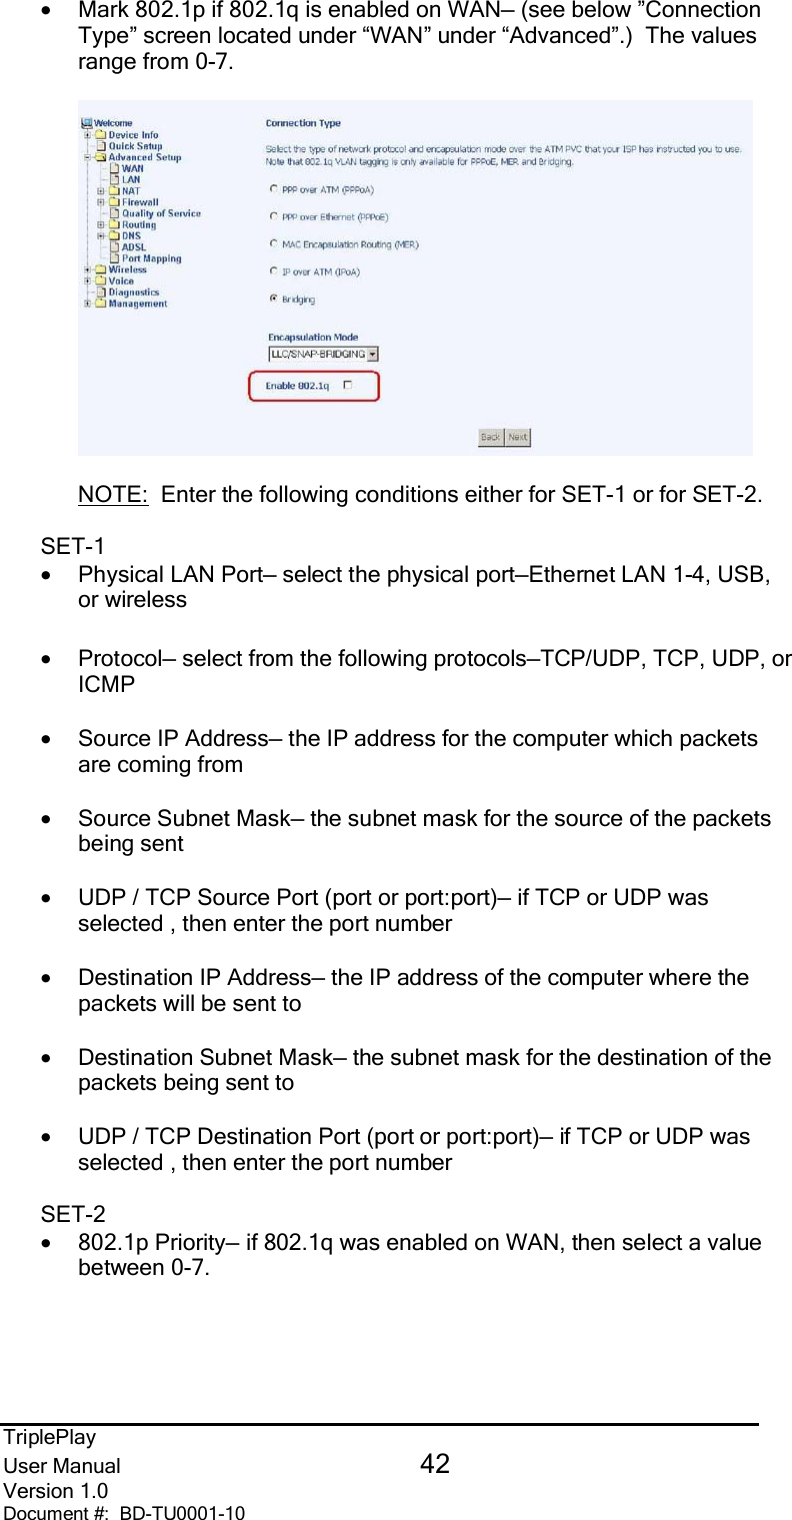 TriplePlayUser Manual 42Version 1.0Document #:  BD-TU0001-10•Mark 802.1p if 802.1q is enabled on WAN— (see below ”ConnectionType” screen located under “WAN” under “Advanced”.)  The valuesrange from 0-7. NOTE:  Enter the following conditions either for SET-1 or for SET-2.SET-1•Physical LAN Port— select the physical port—Ethernet LAN 1-4, USB,or wireless•Protocol— select from the following protocols—TCP/UDP, TCP, UDP, orICMP•Source IP Address— the IP address for the computer which packetsare coming from•Source Subnet Mask— the subnet mask for the source of the packetsbeing sent•UDP / TCP Source Port (port or port:port)— if TCP or UDP wasselected , then enter the port number•Destination IP Address— the IP address of the computer where thepackets will be sent to•Destination Subnet Mask— the subnet mask for the destination of thepackets being sent to•UDP / TCP Destination Port (port or port:port)— if TCP or UDP wasselected , then enter the port numberSET-2•802.1p Priority— if 802.1q was enabled on WAN, then select a valuebetween 0-7.